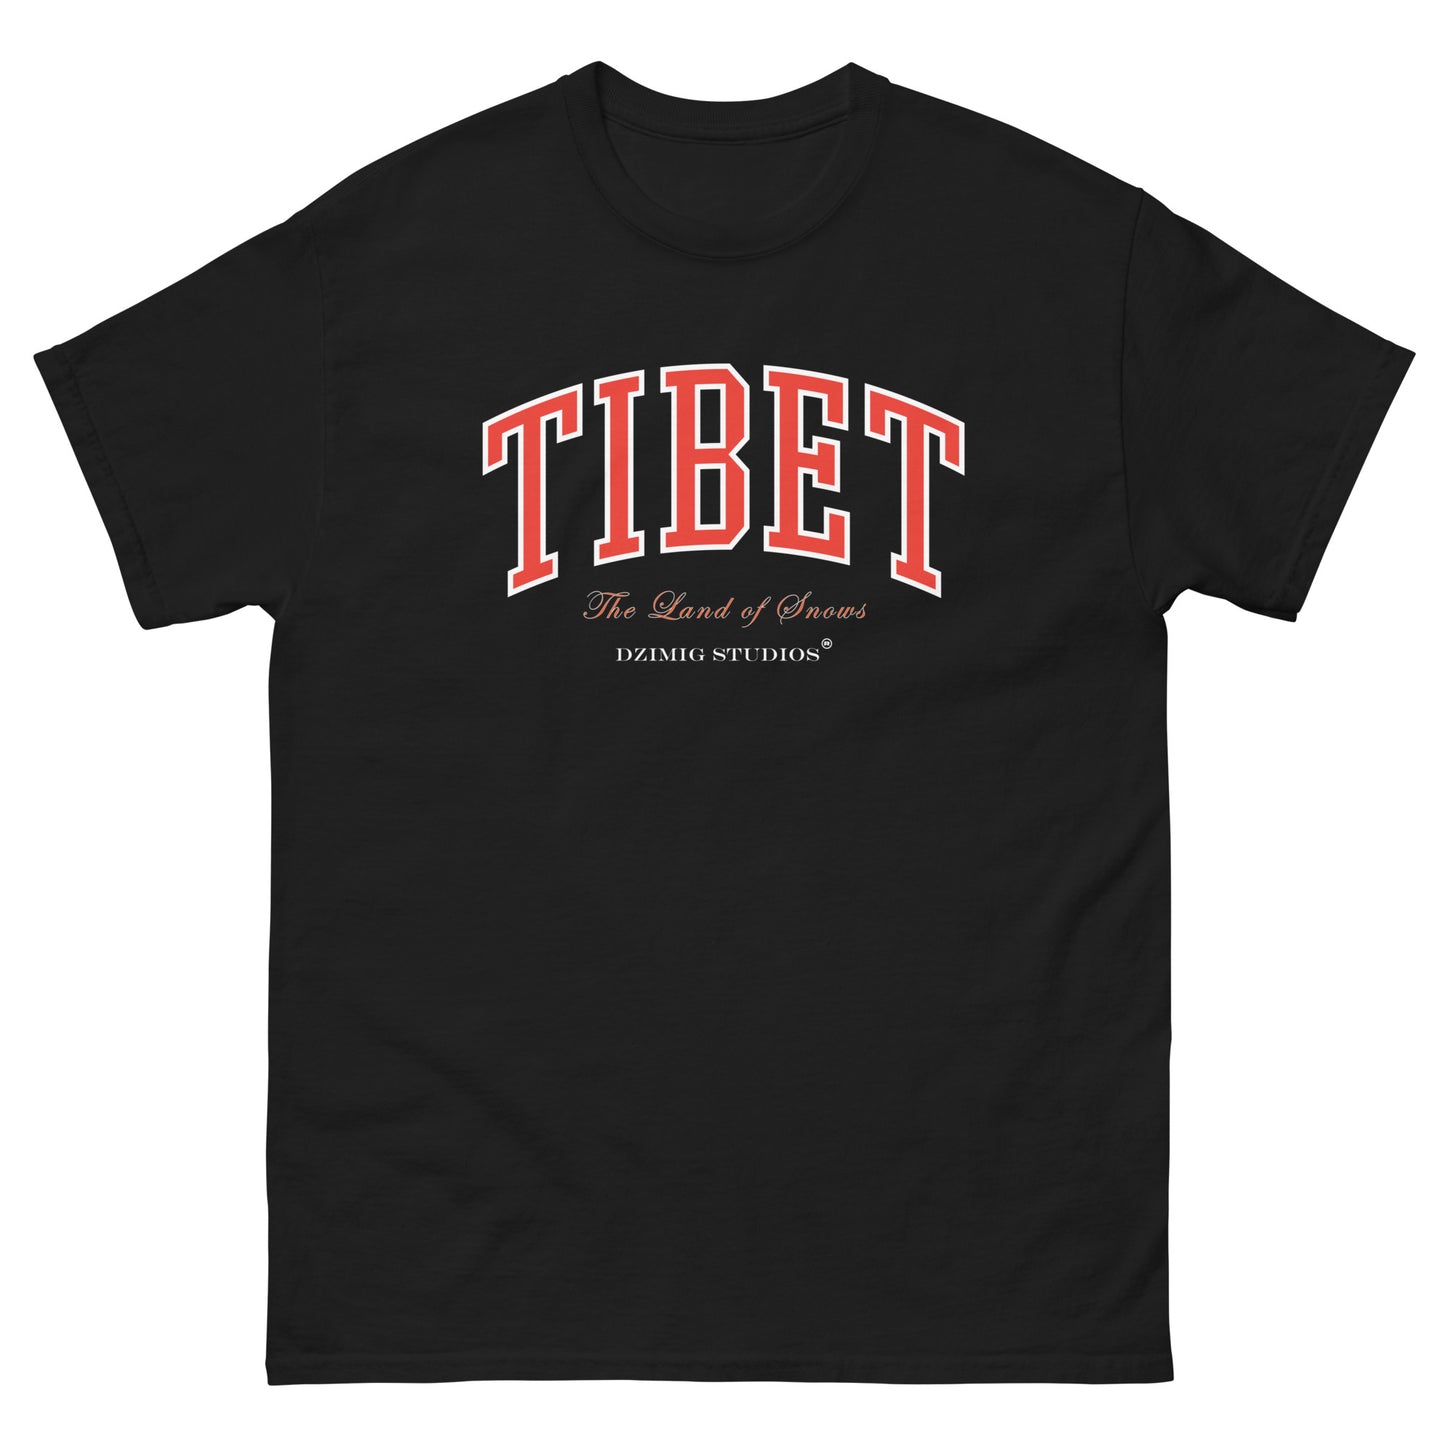 Unisex classic tees. TIBET CLASSIC TEES are curated and designed under Dzimig Studios' Tibet Archive Project.  The tees are avilable in four different color. The tees go perfectly with daily casual wear.